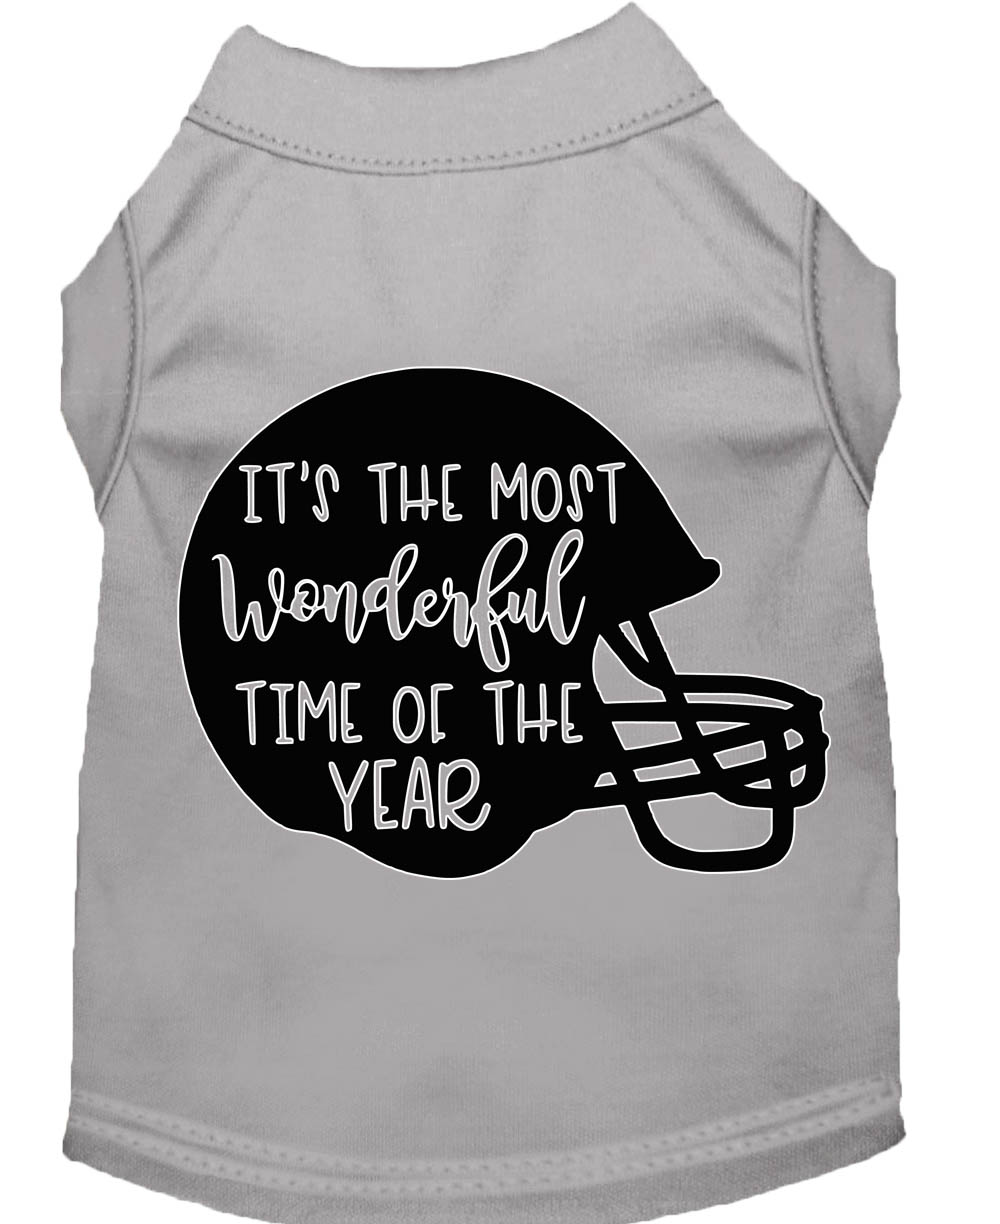 Most Wonderful Time of the Year (Football) Screen Print Dog Shirt Grey Med